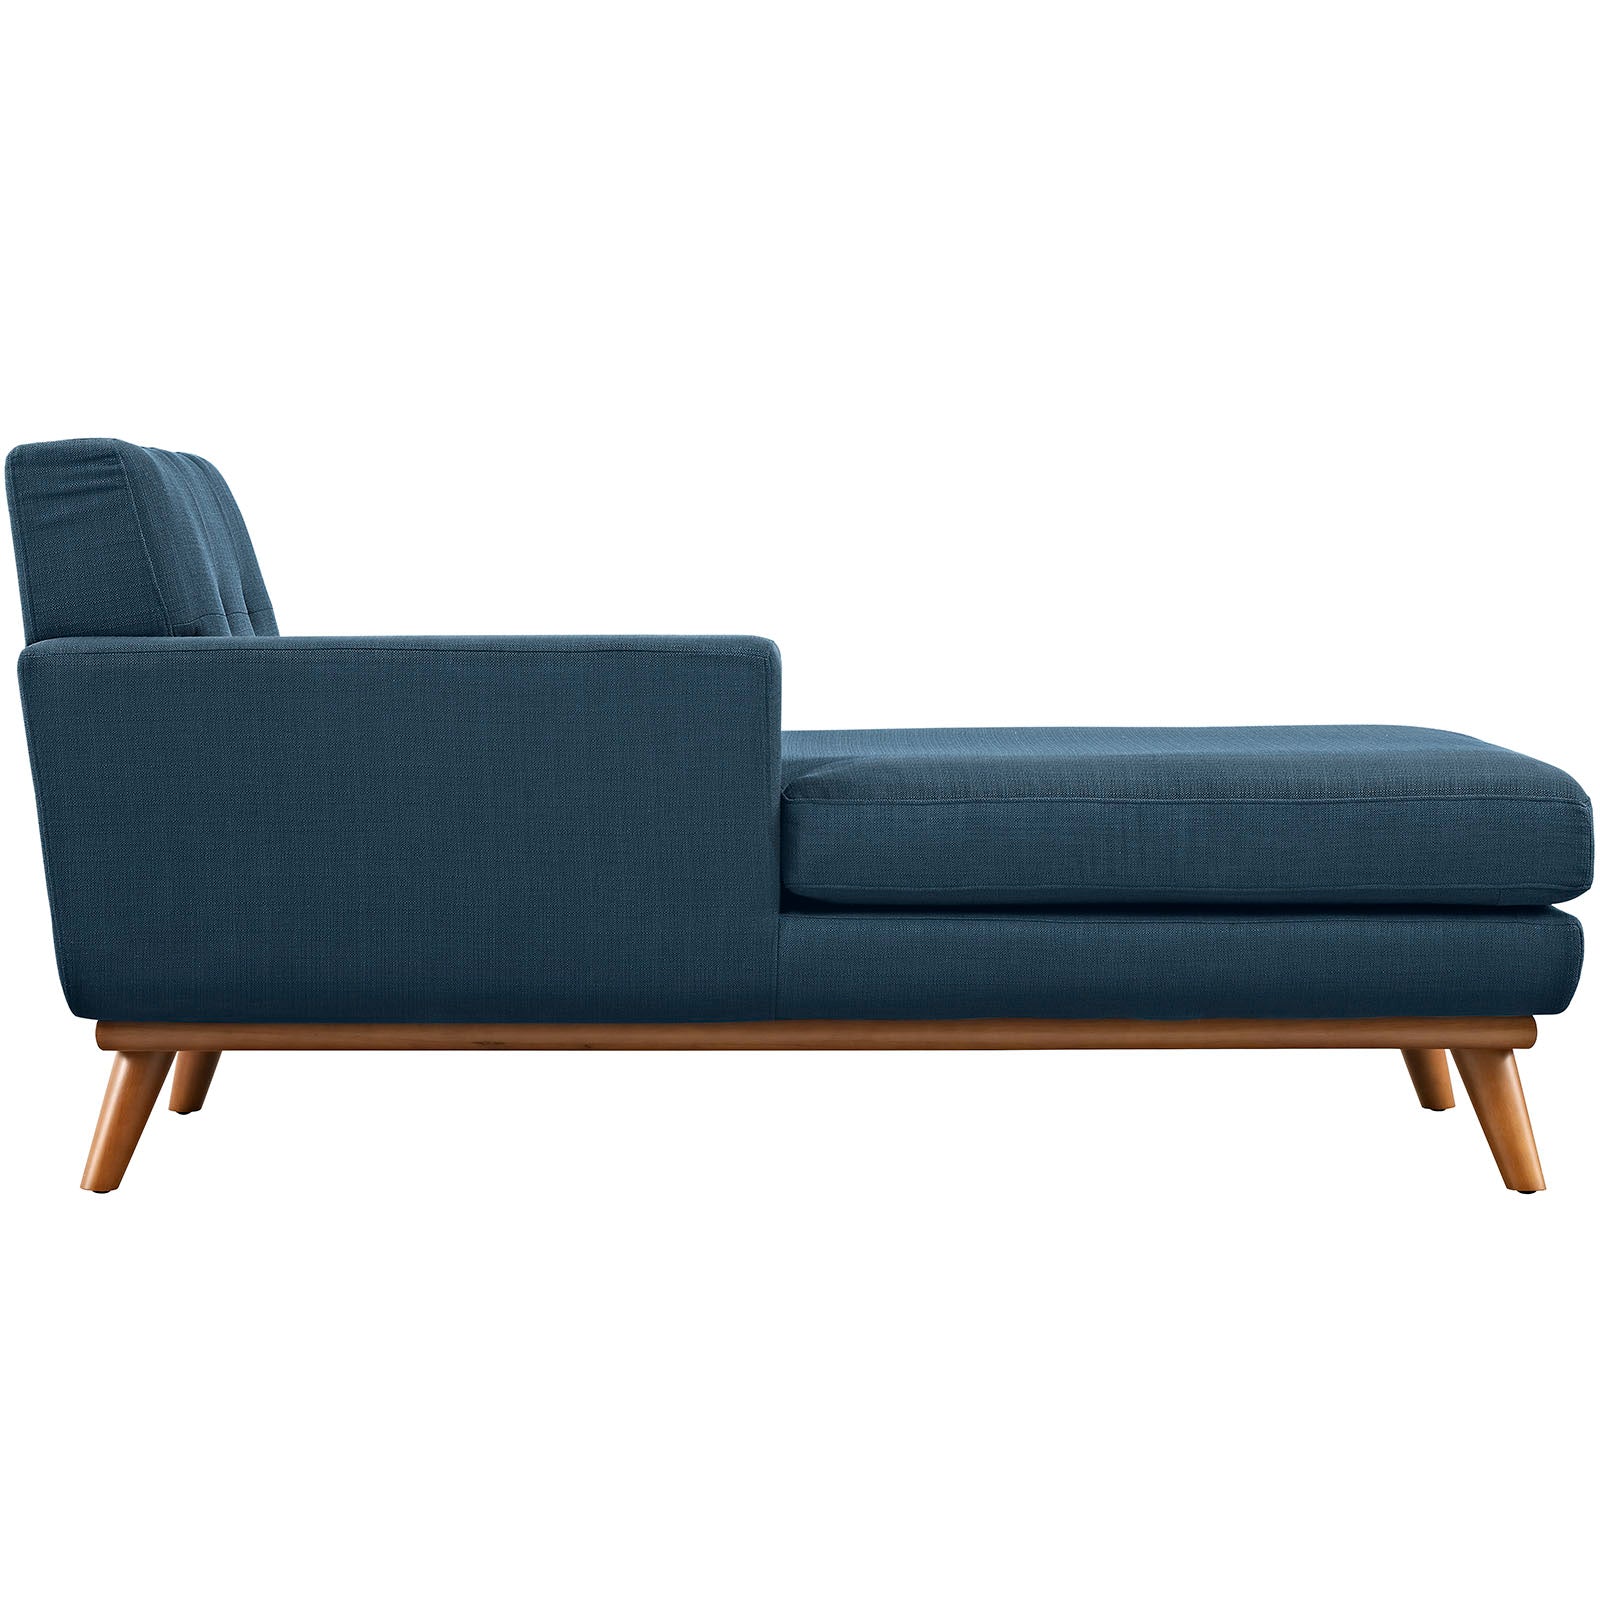 Modway Sleepers & Futons - Engage Left-Facing Upholstered Fabric Chaise Azure